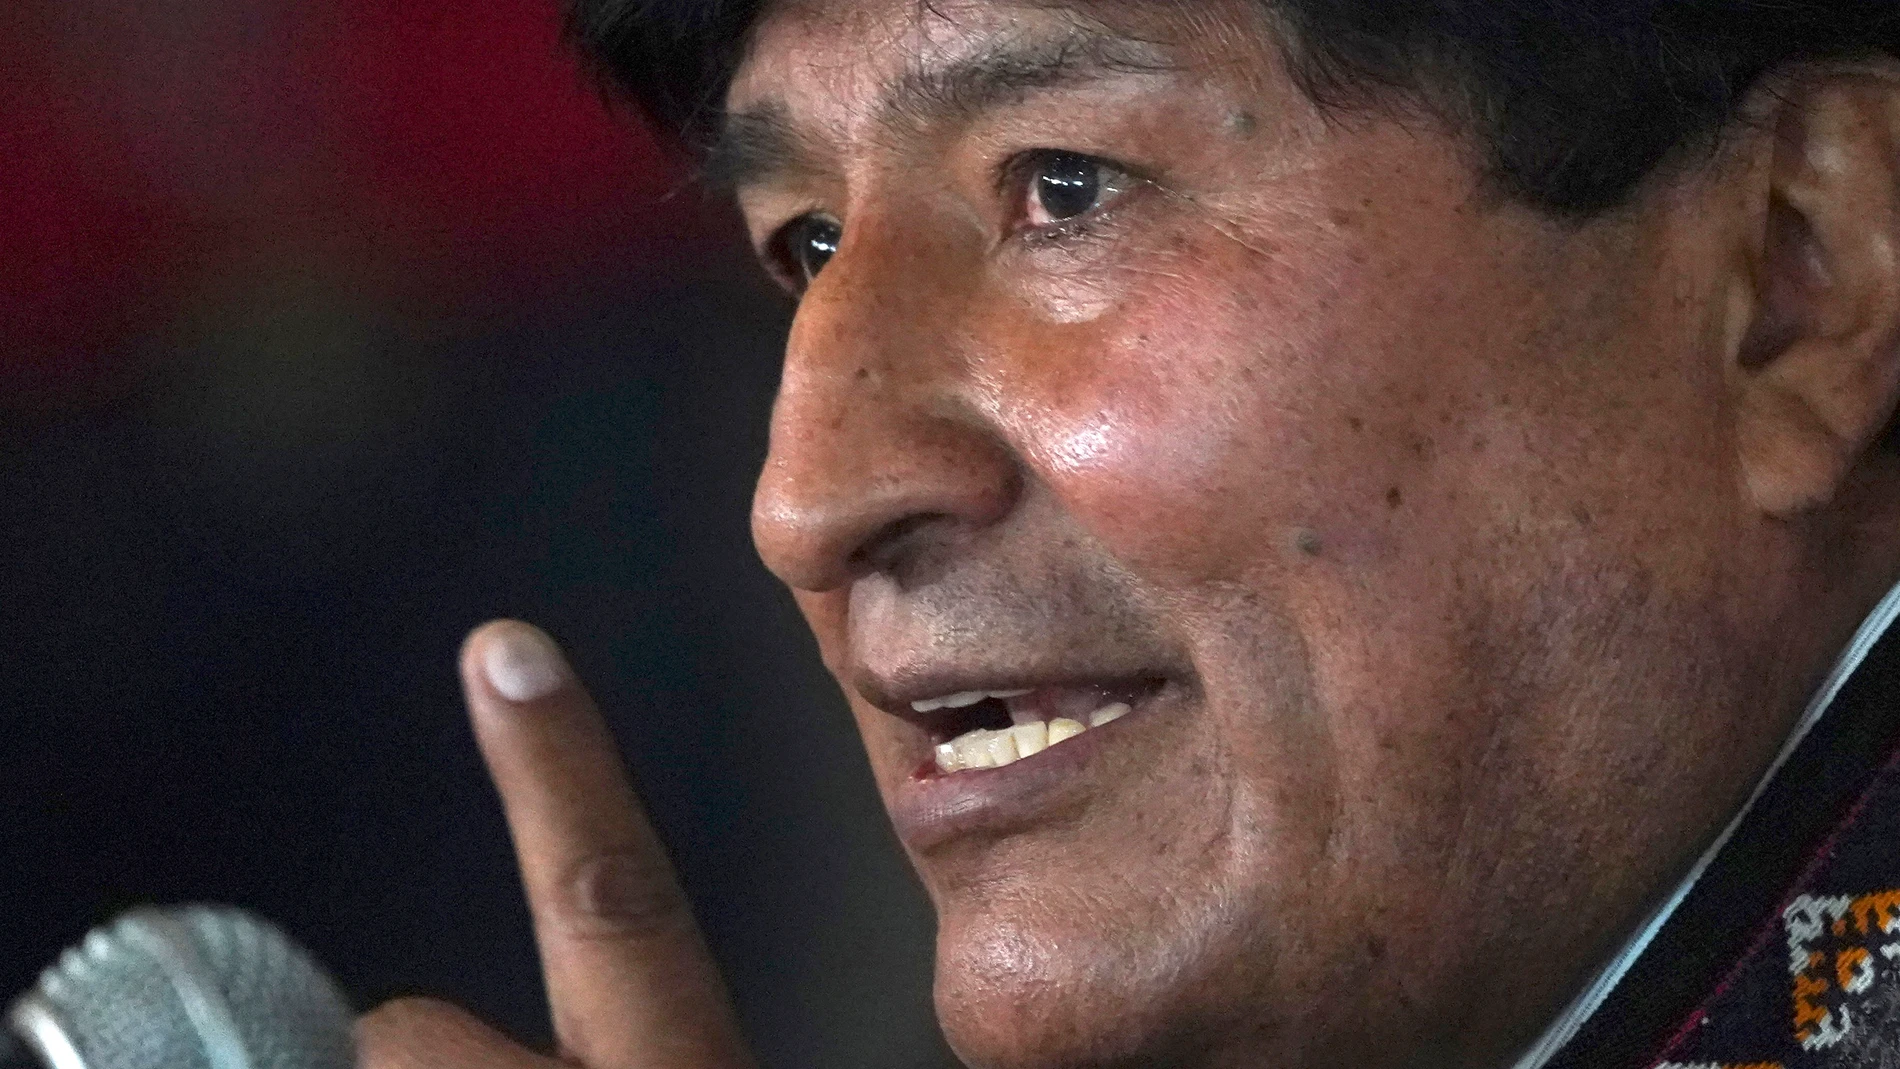 FILE - Evo Morales, former president of Bolivia, speaks during a press conference on the sidelines of a Labor Party seminar, in Mexico City, Oct. 22 2021. On the social network X, formerly known as Twitter, Morales accused Ecuador's current President Luis Arce, on Saturday, Dec. 30, 2023, of plotting to keep him from competing in the 2025 presidential race. (AP Photo/Marco Ugarte, File)